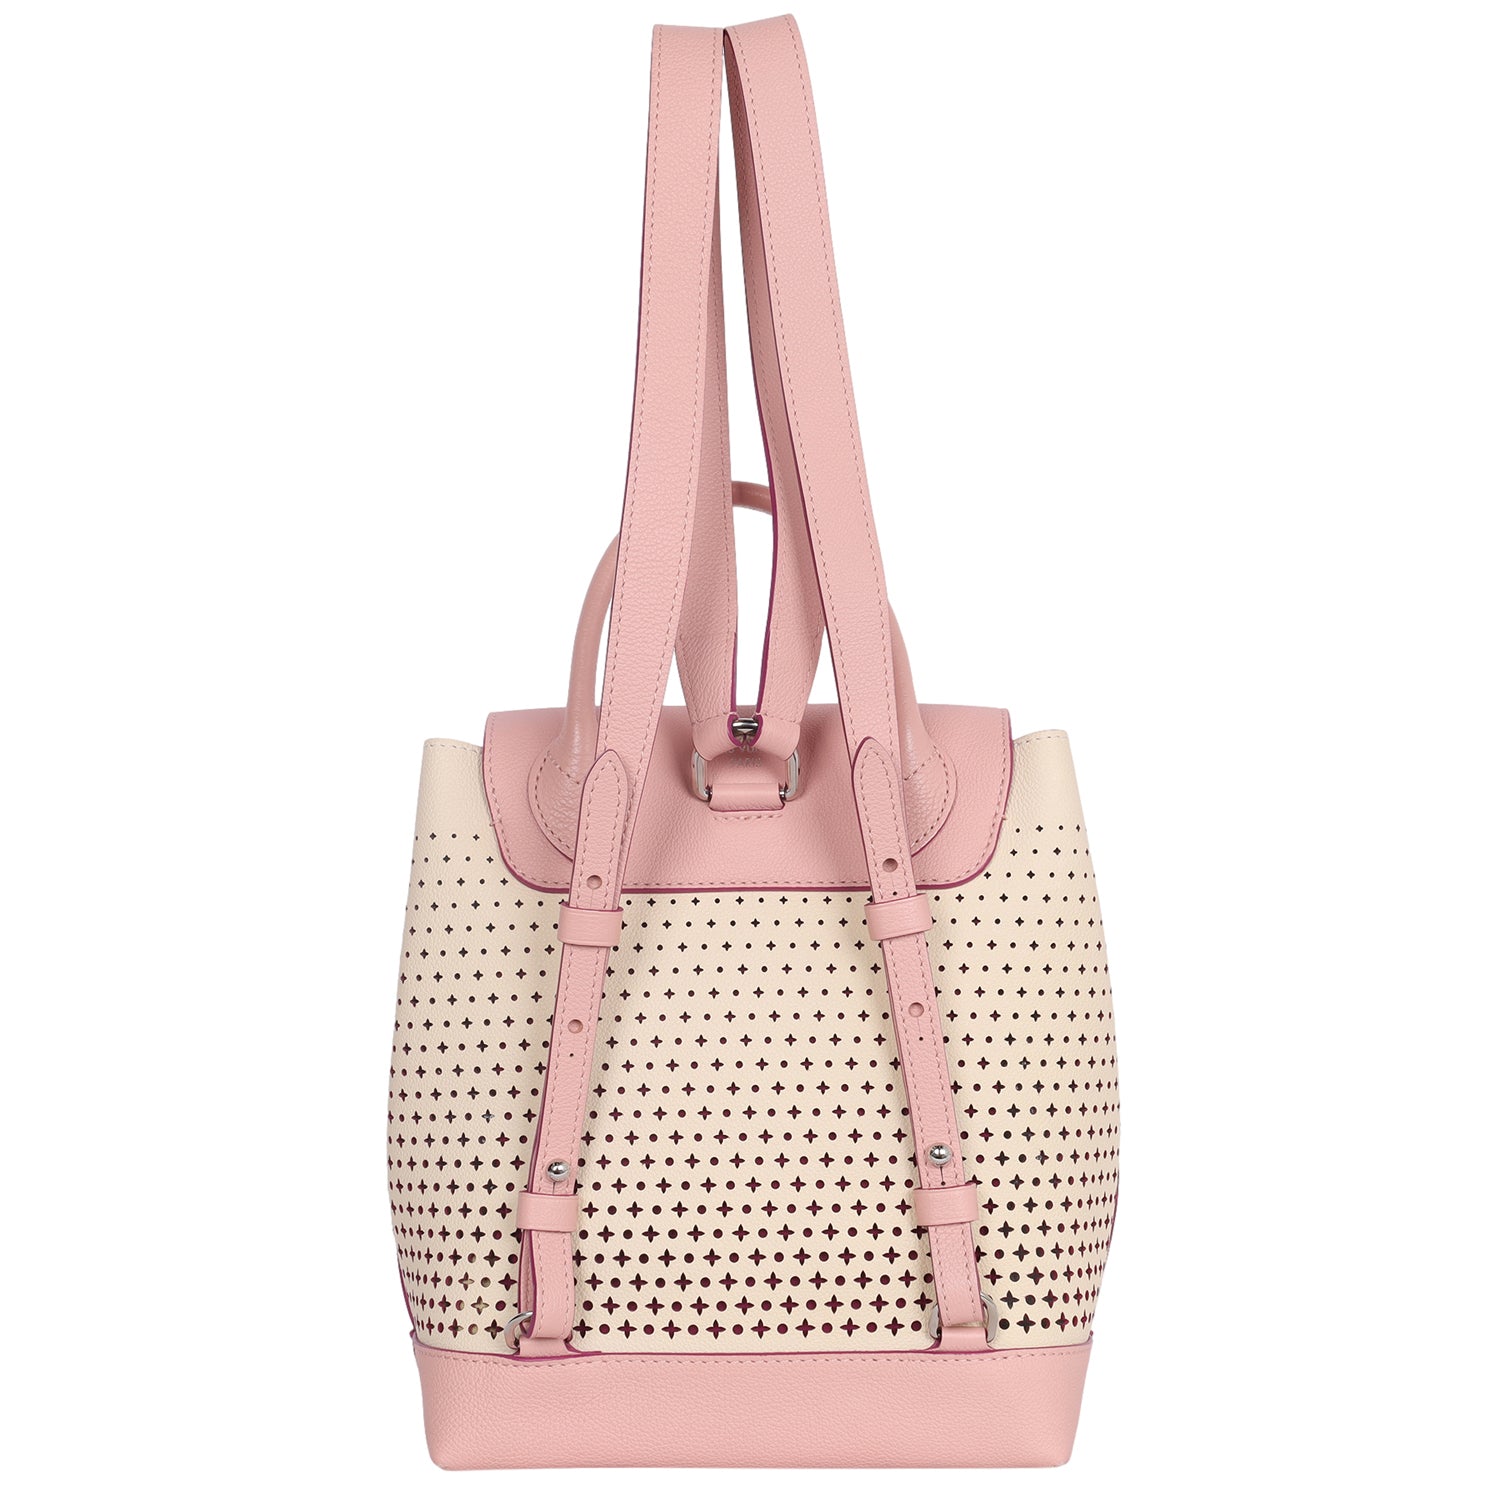 Louis Vuitton 2016 Pre-owned Lockme Leather Backpack - Pink